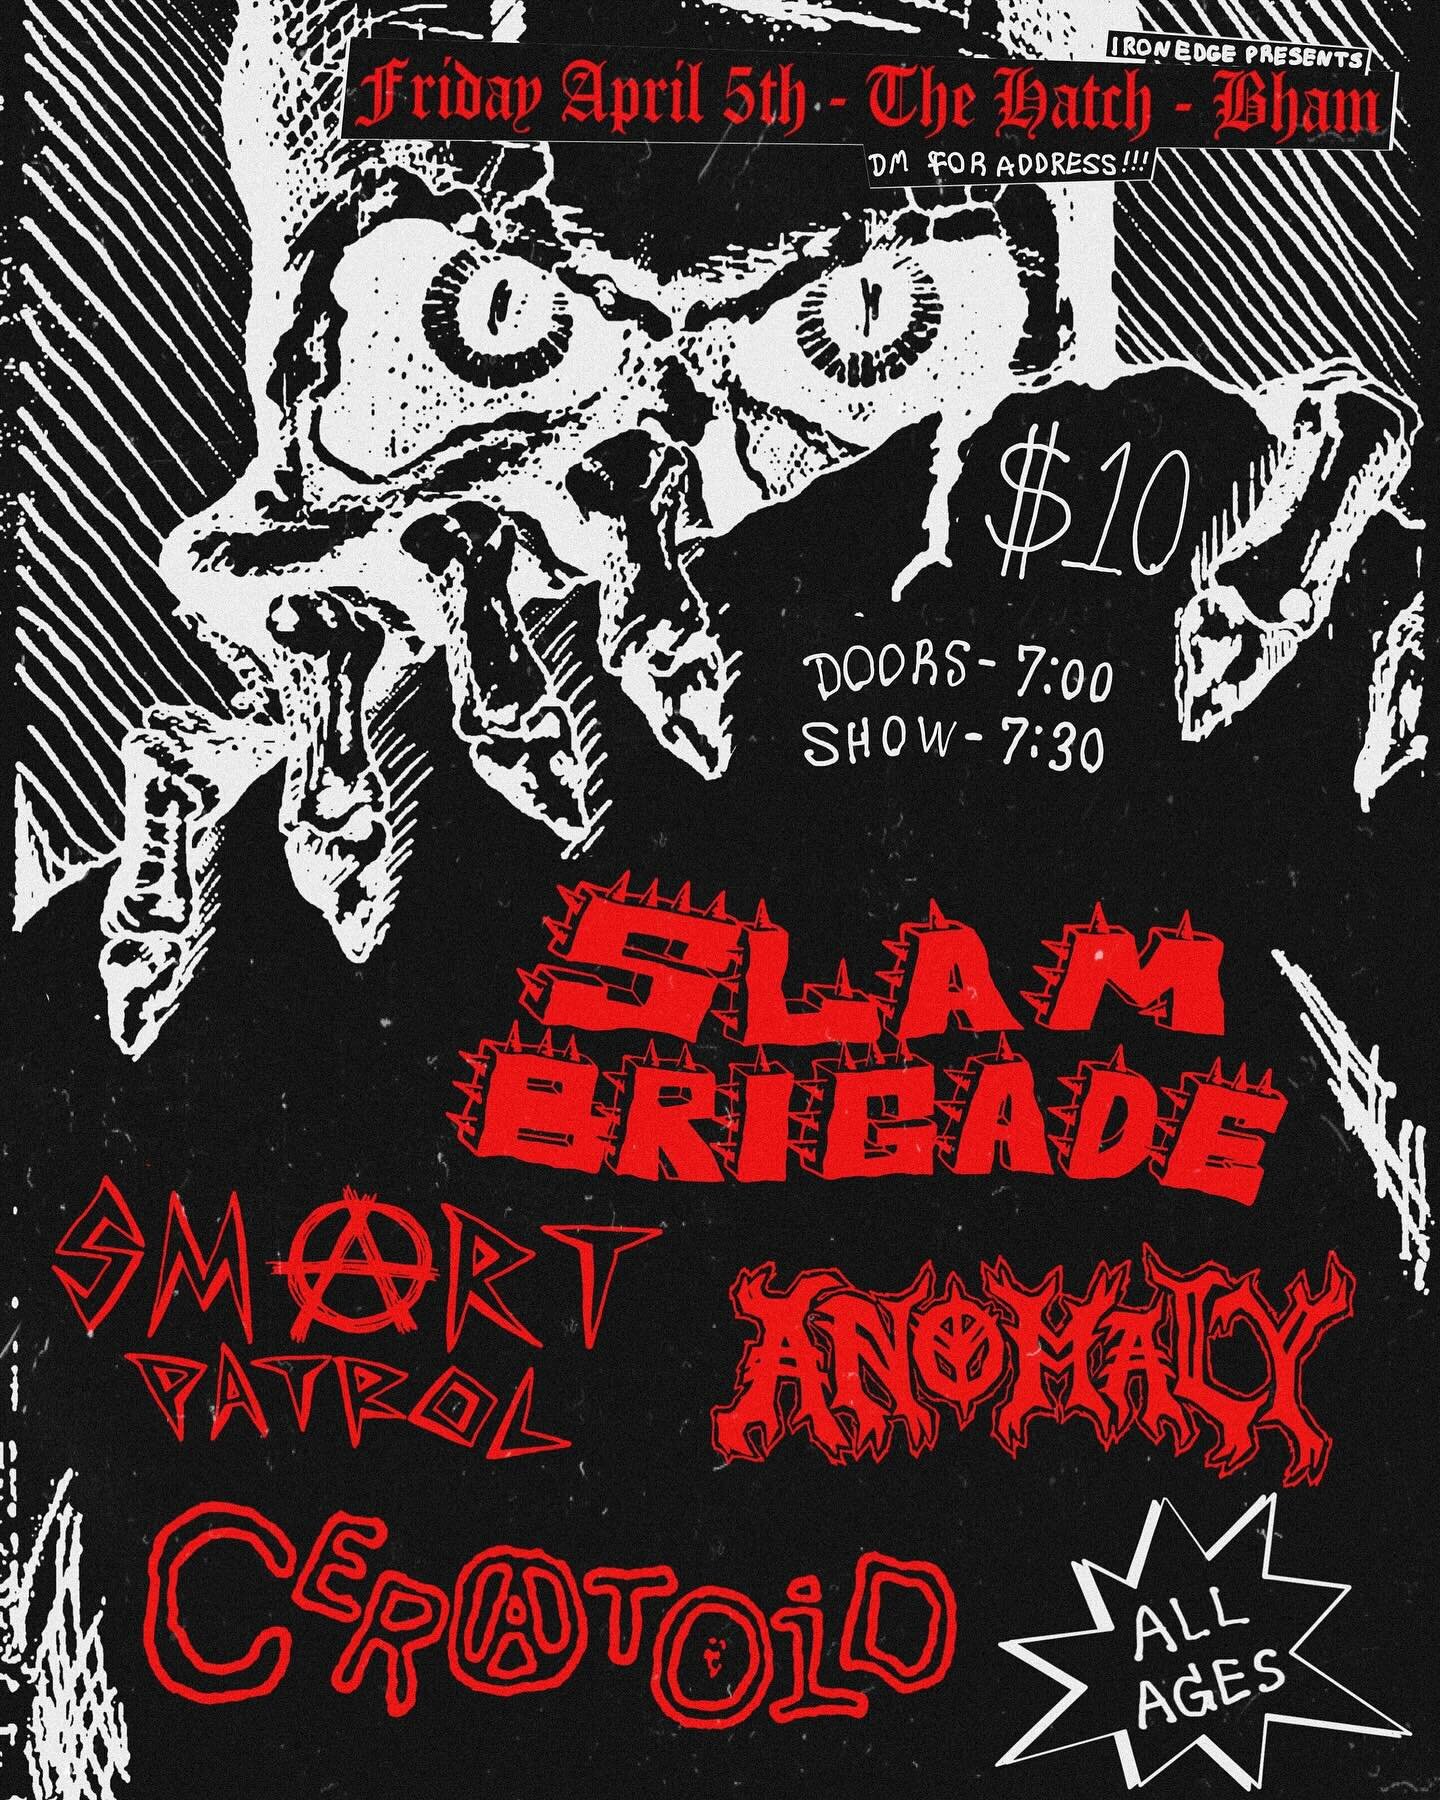 One week from today! Next Friday! @the.slam.brigade , Smart Patrol, Anomaly, and @ceratoid_ ! At The Hatch!!? All Ages!! Respect the space!!! See you there?!?!

Flyer: @ironlordxbham